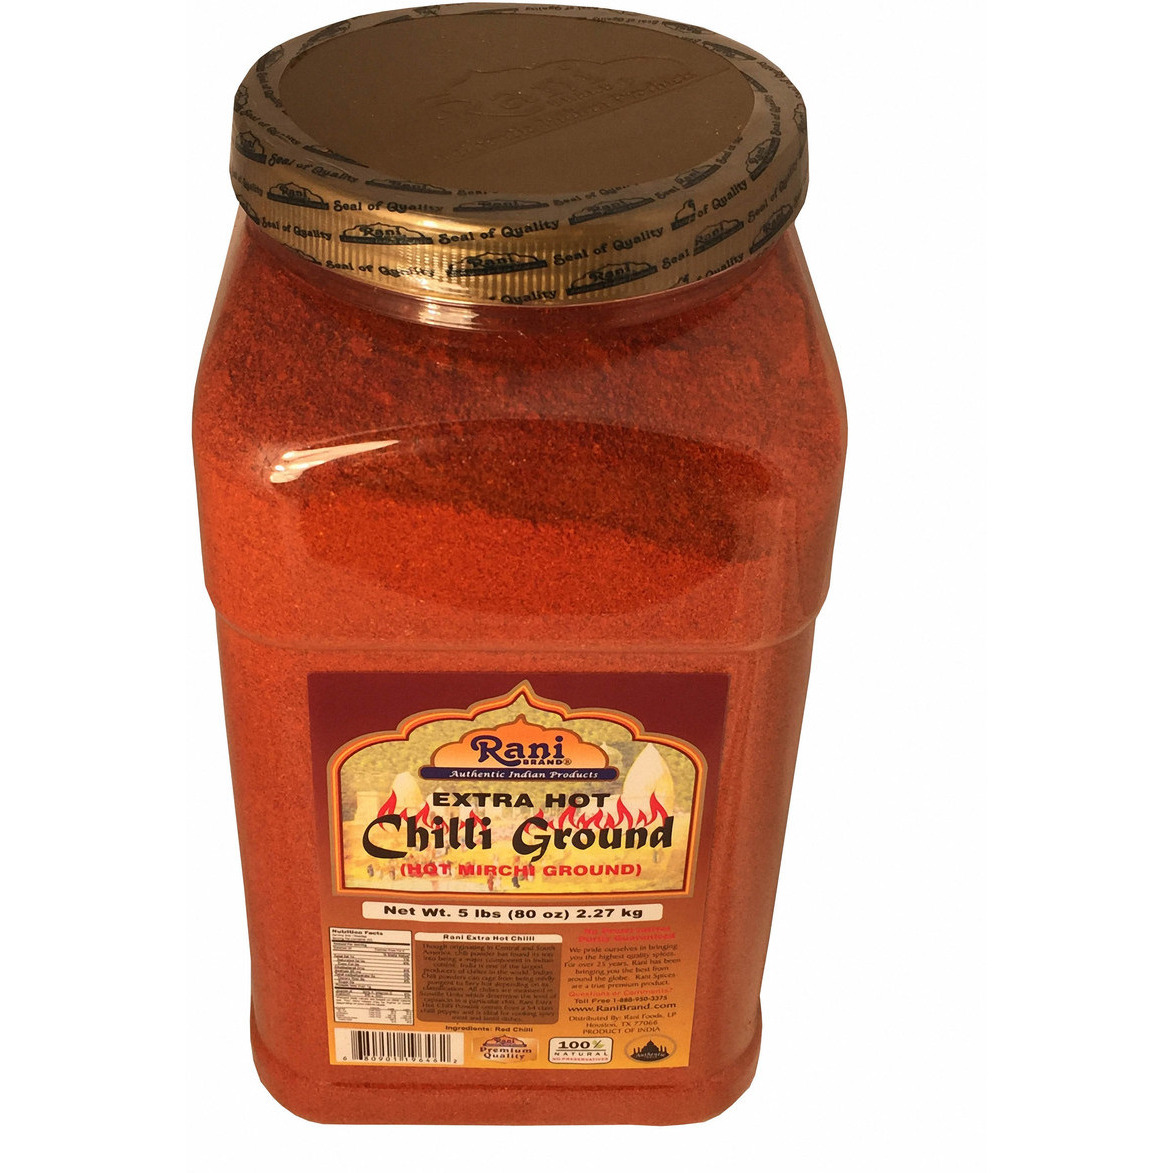 Rani Extra Hot Chilli Powder Indian Spice 5lbs (80oz) Bulk ~ All Natural, No Color added, Gluten Friendly | Vegan | NON-GMO | No Salt or fillers